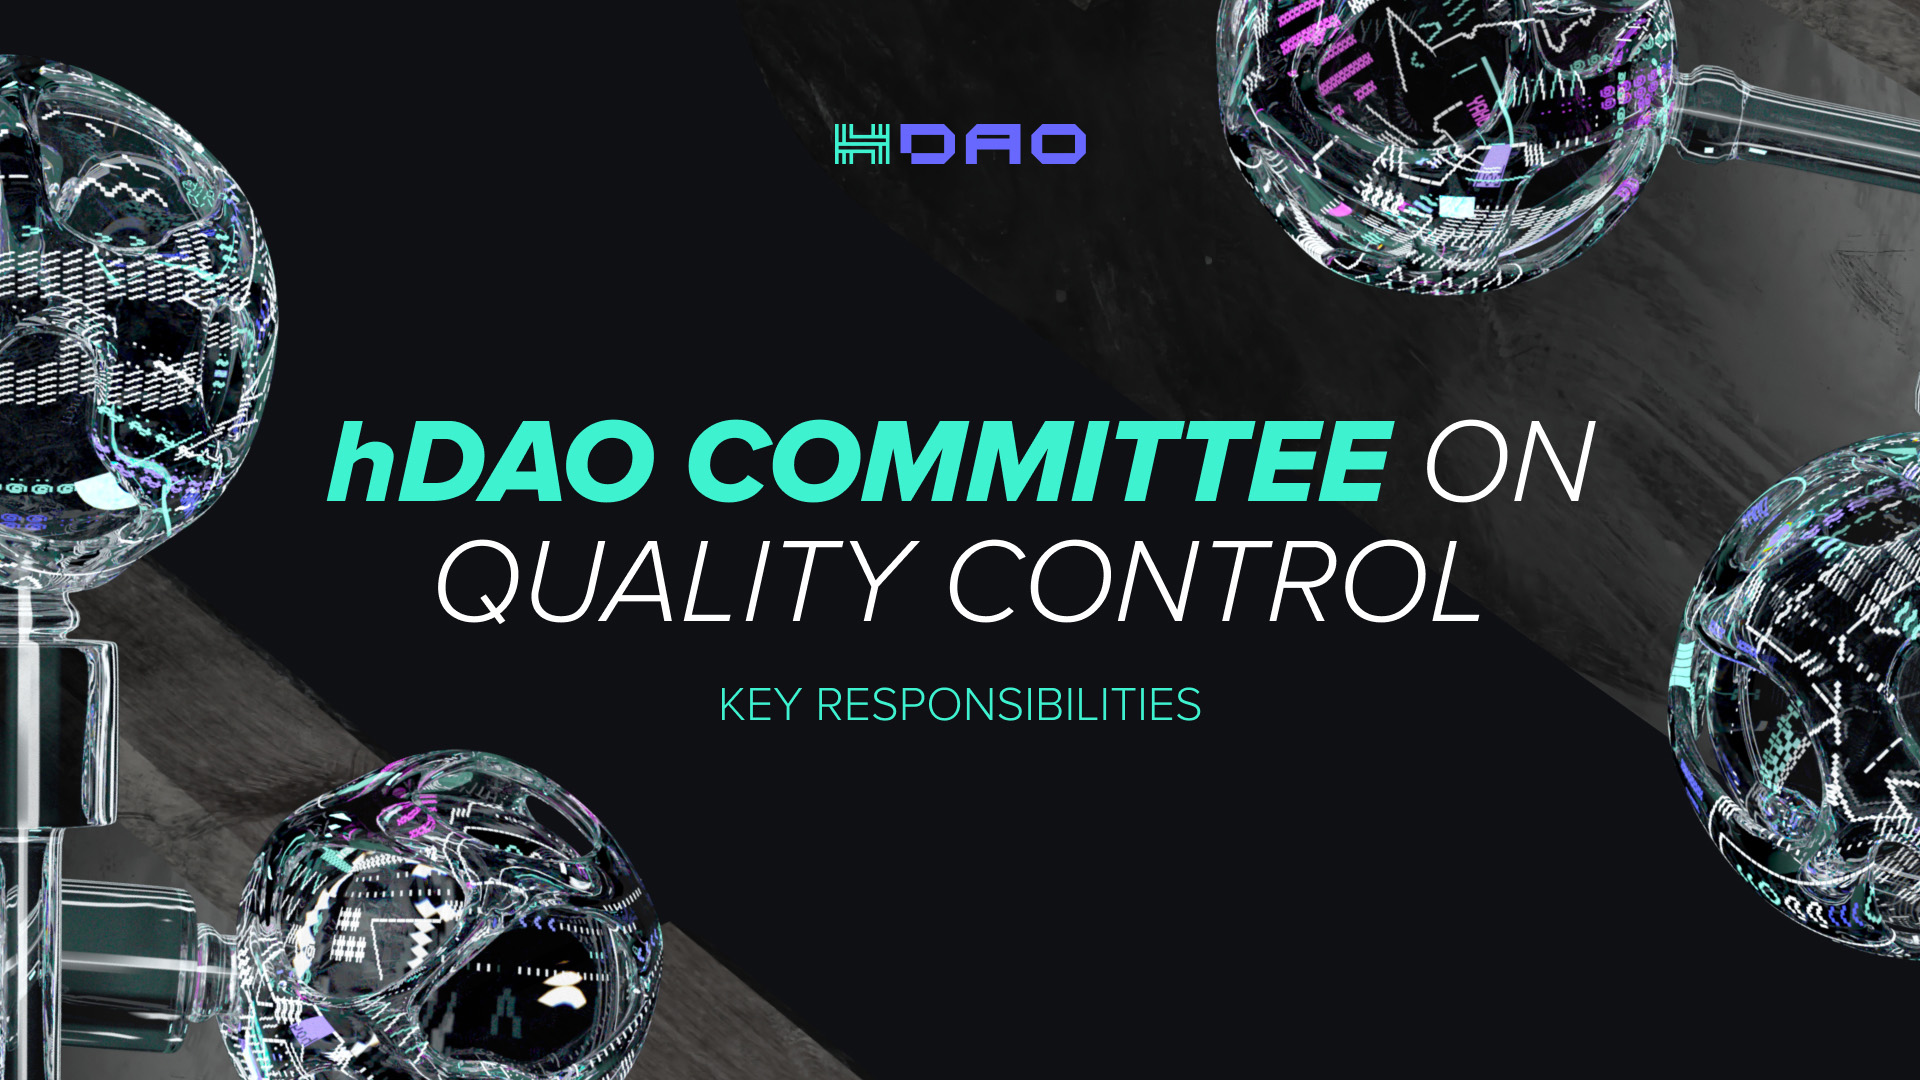 Key Responsibilities of hDAO Committee on Quality Control